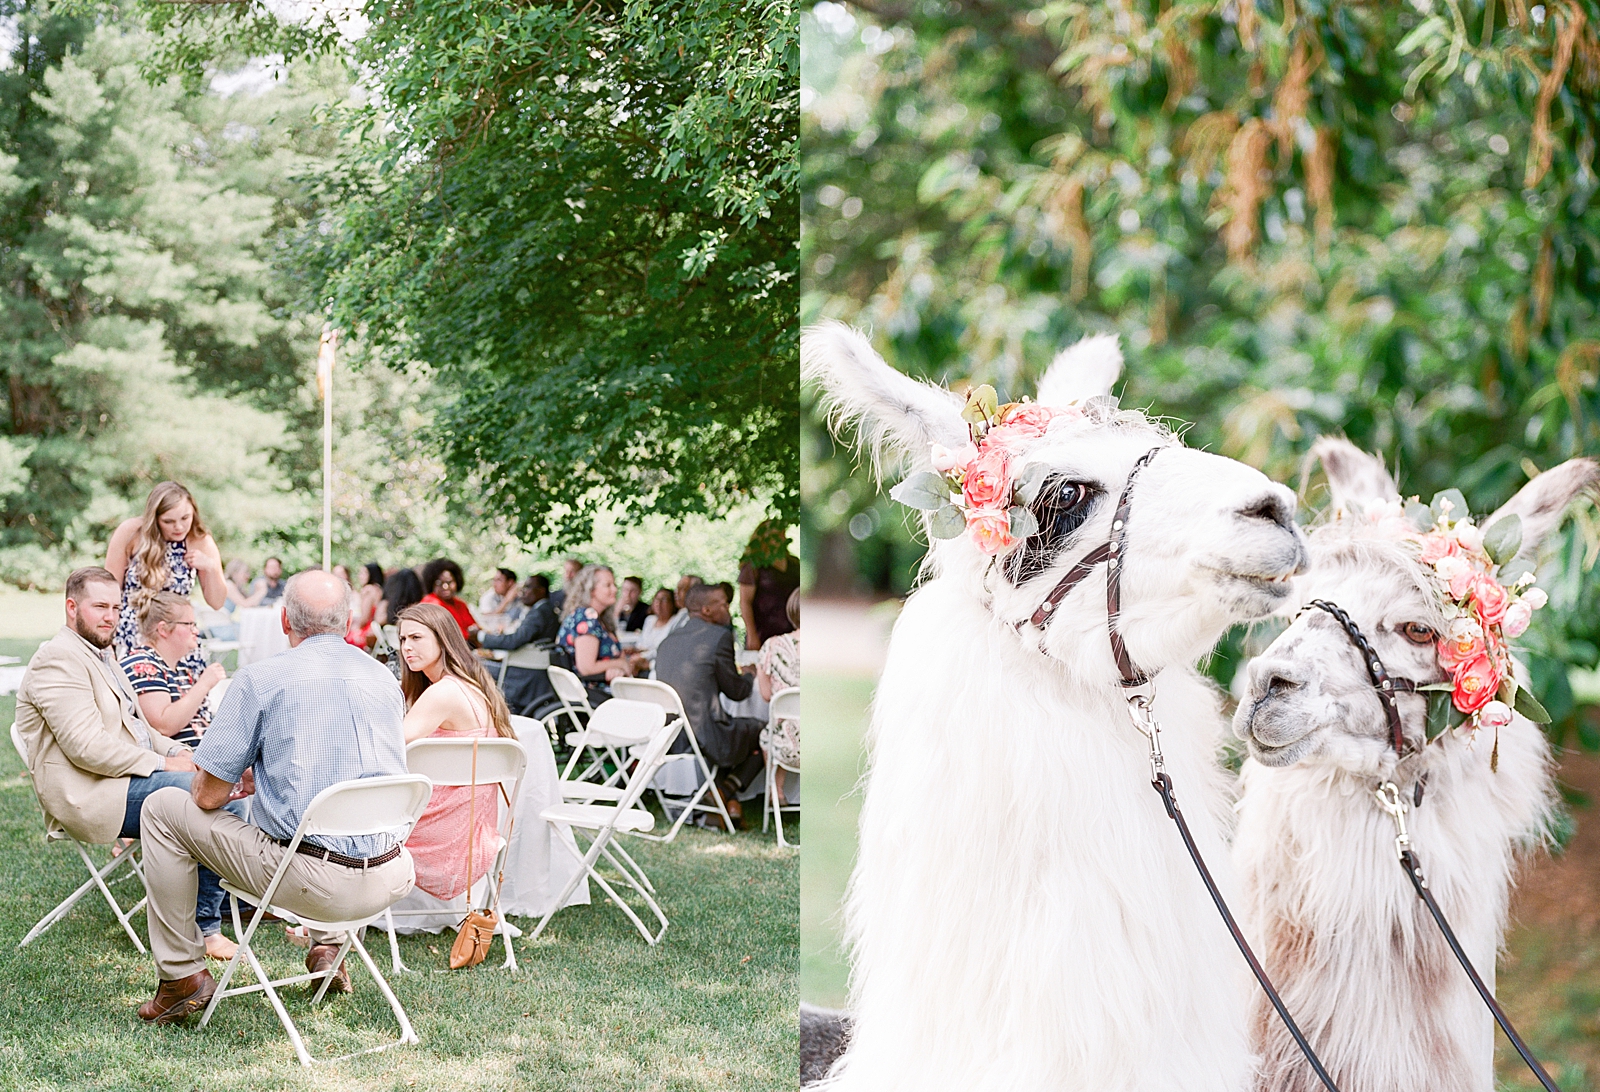 Black Fox Farms Garden Wedding Reception Guests sitting at tables under trees and Llamas with flower crowns Photos